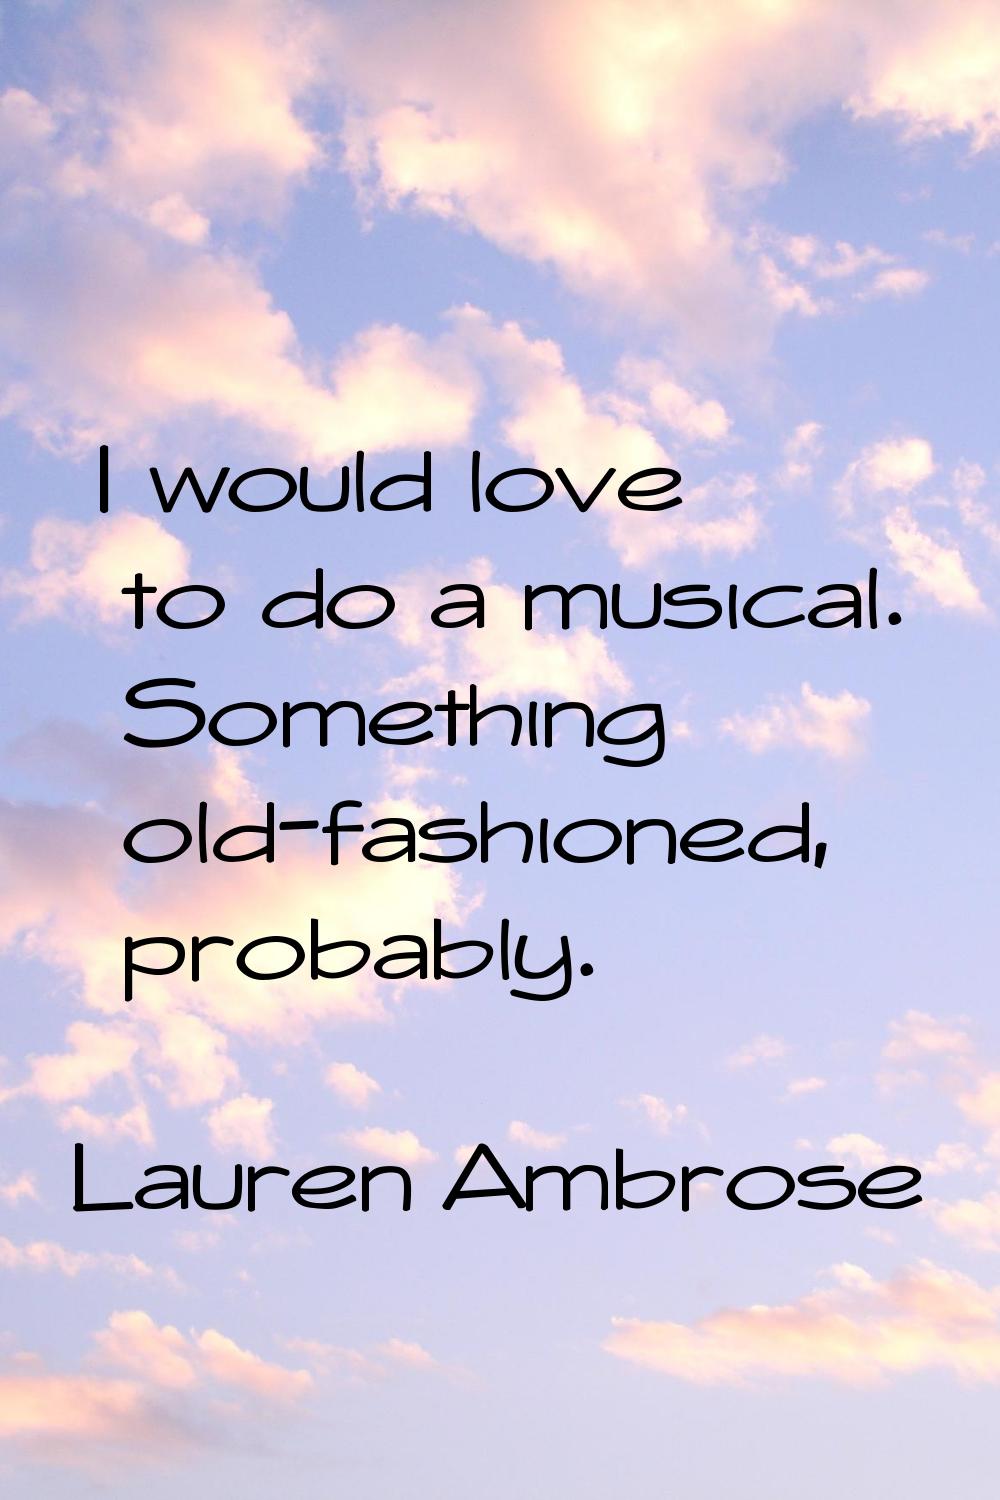 I would love to do a musical. Something old-fashioned, probably.